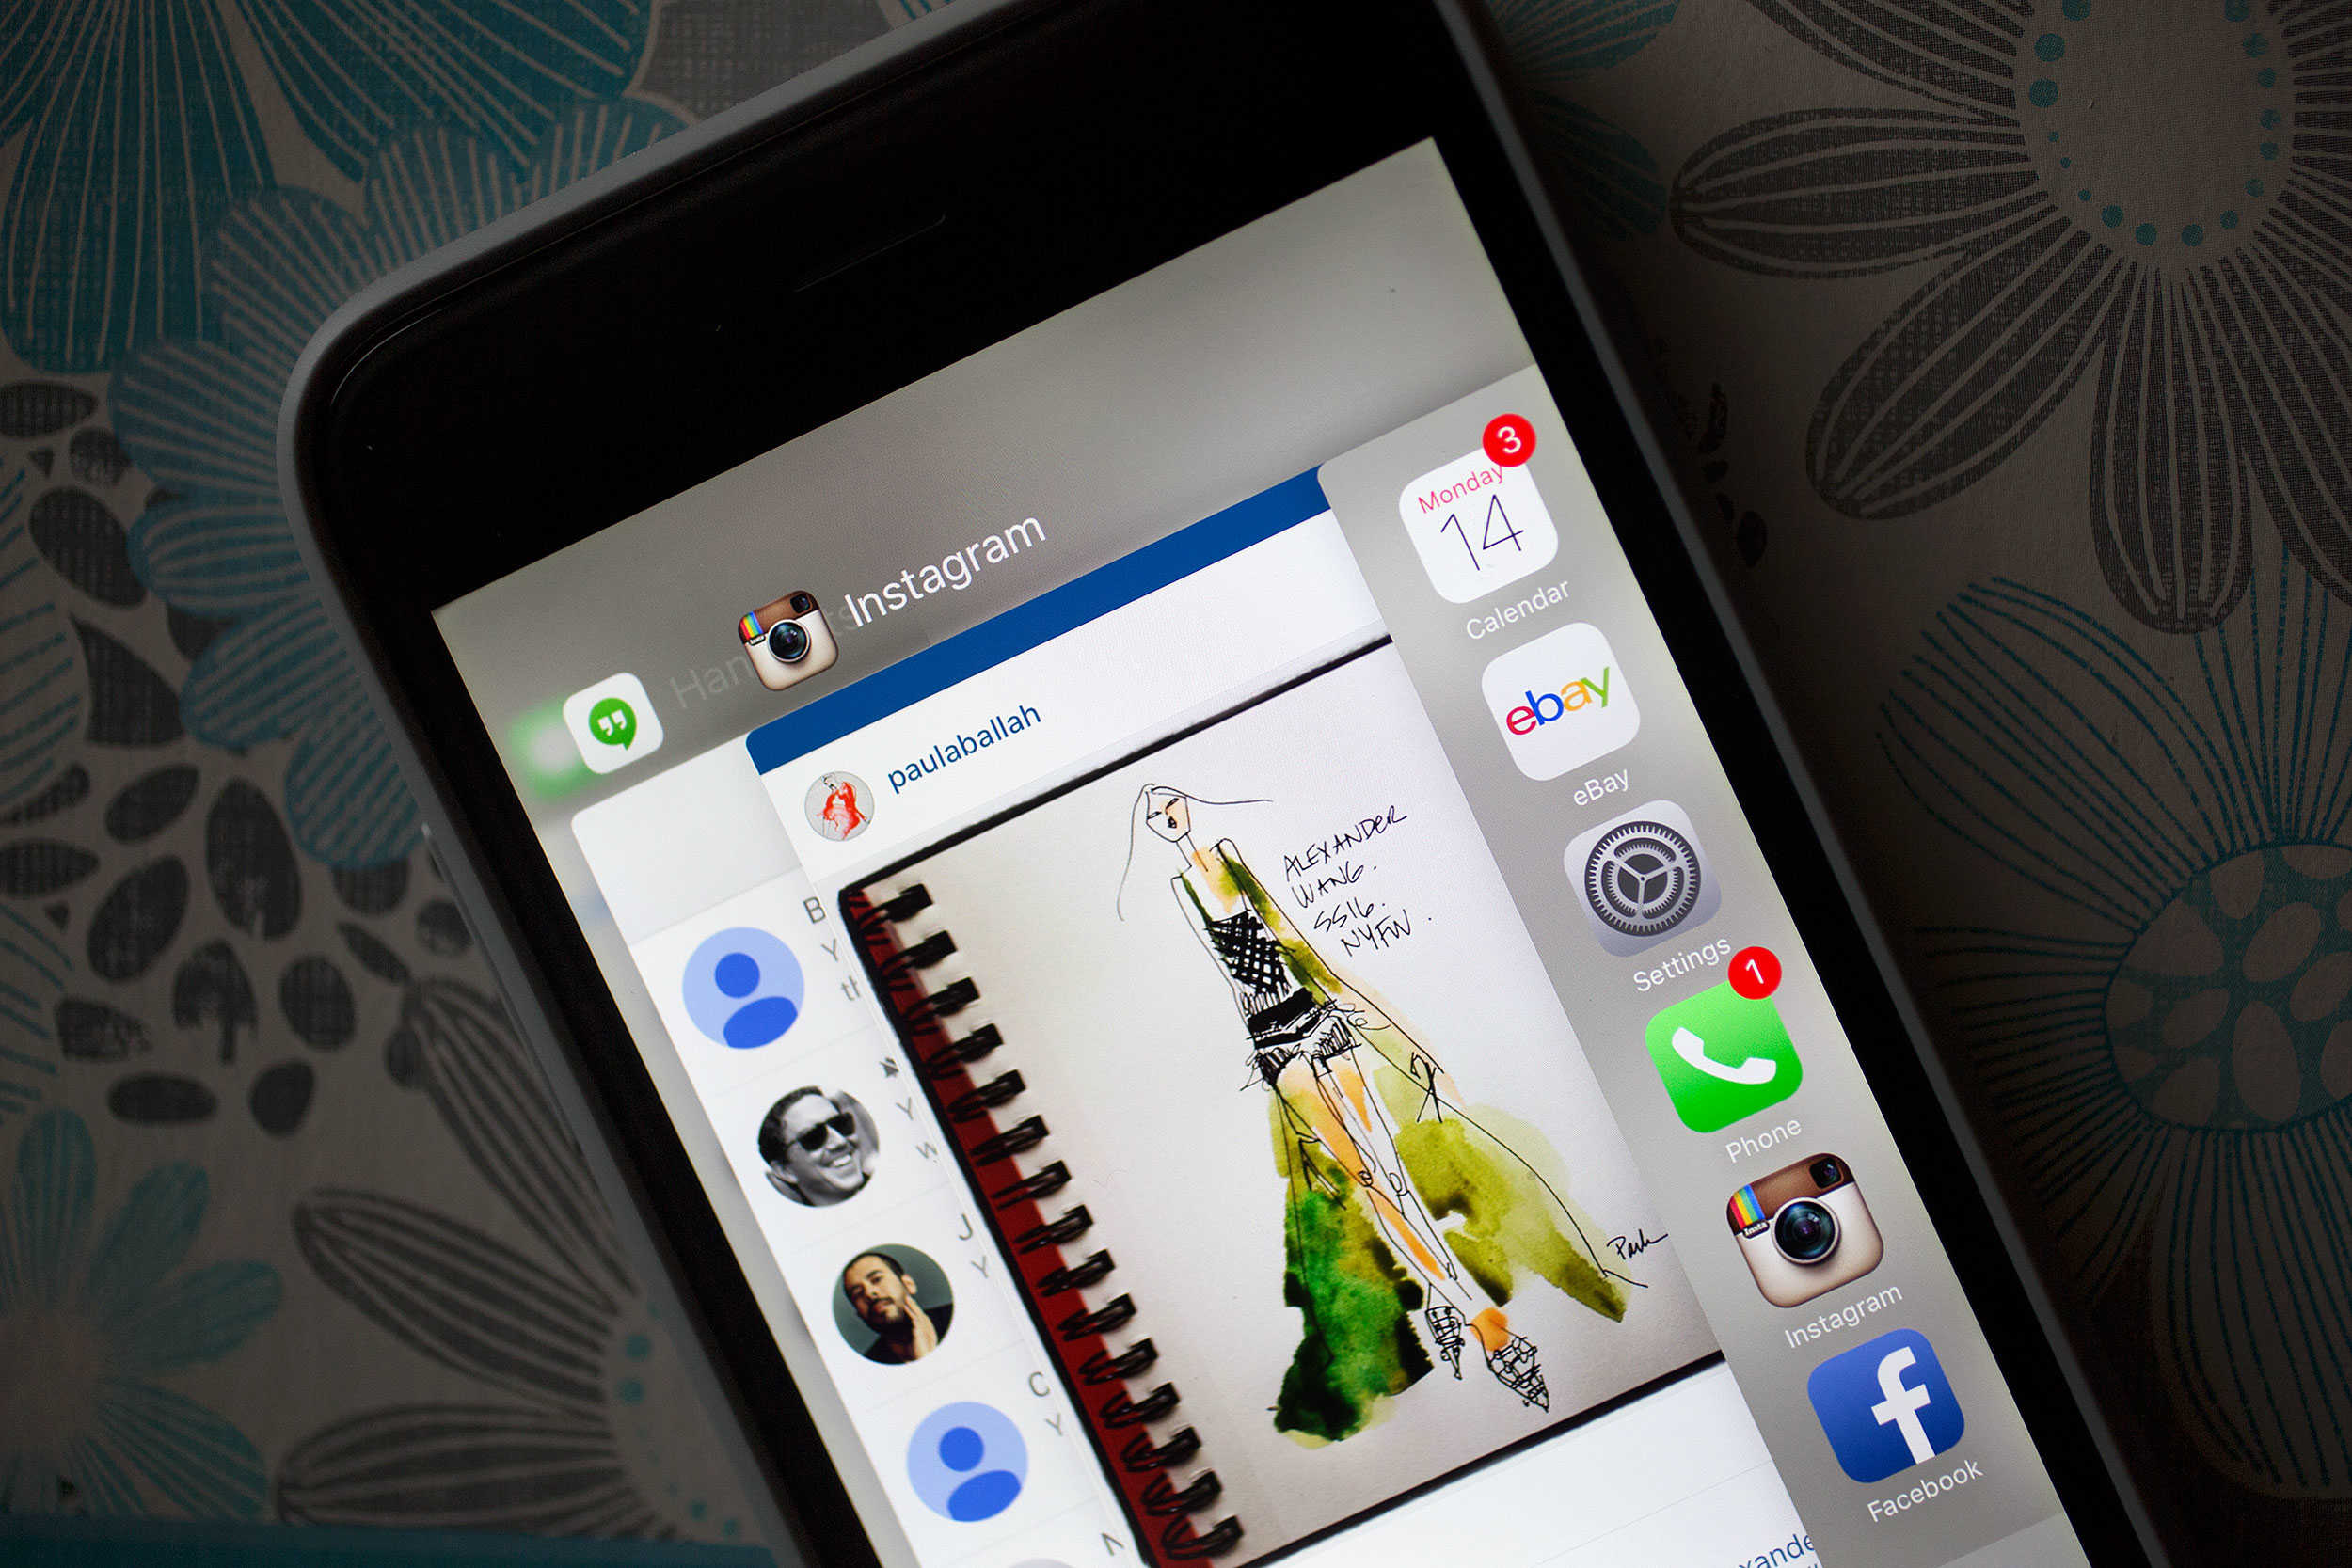 iOS 9 has tons of little tweaks waiting for you.